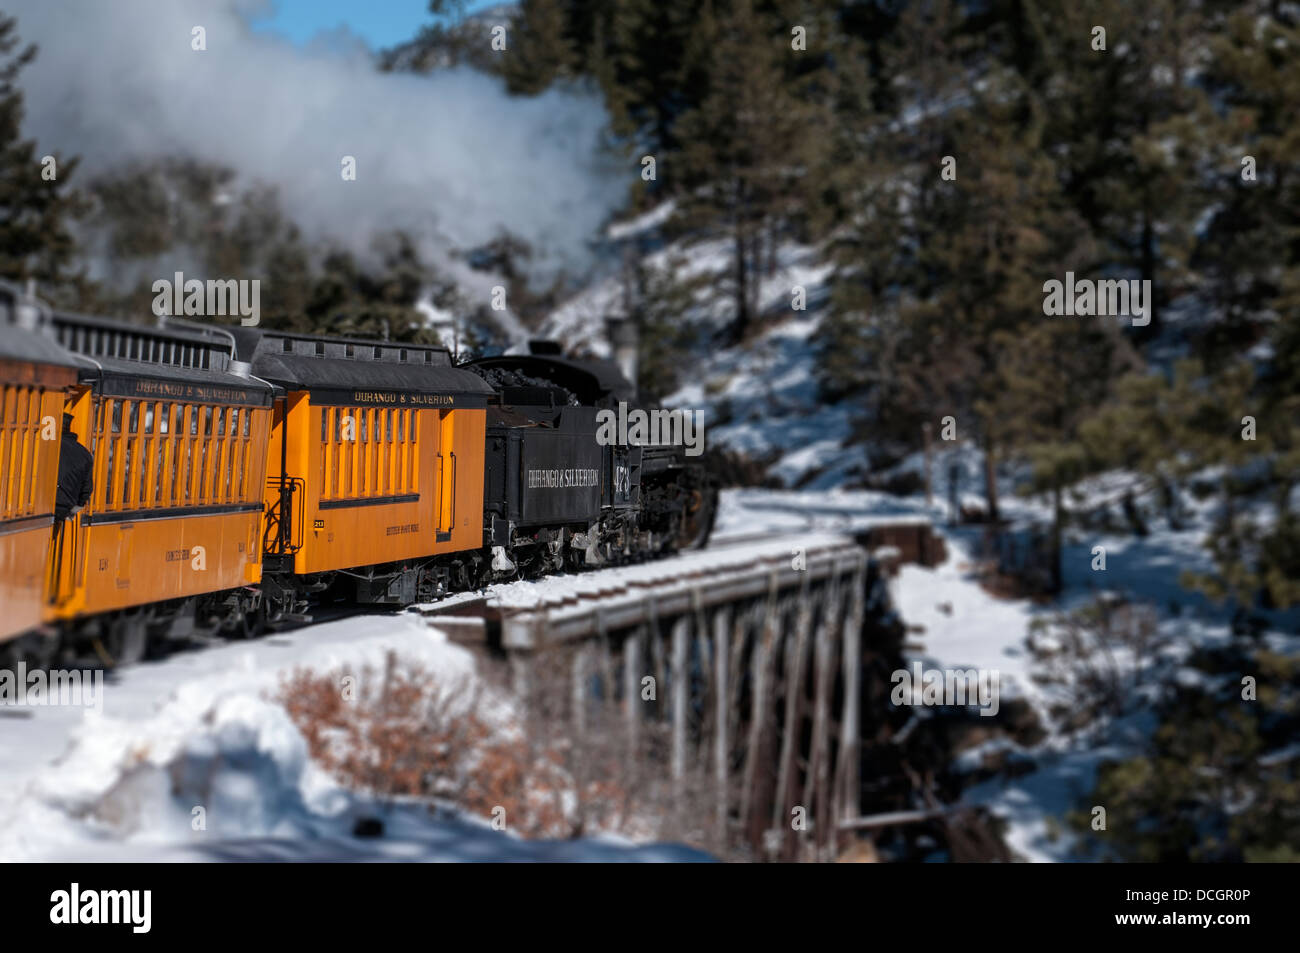 Steam engine and boxcars from the Durango and Silverton Narrow Gauge Railroad. Stock Photo